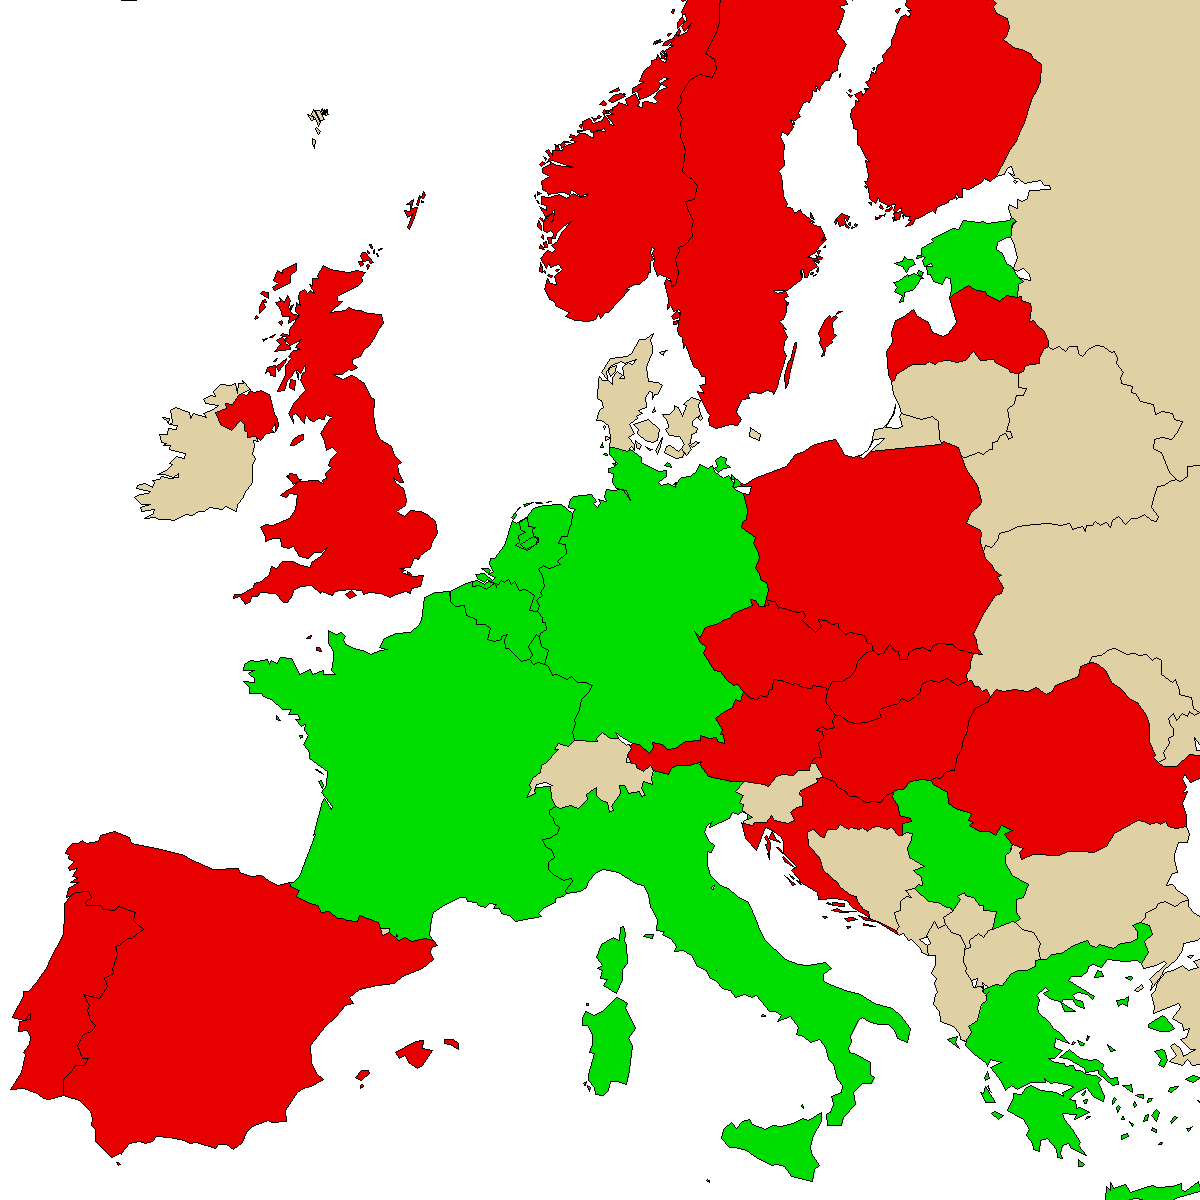 legal info map for our product 4HO-MET, green are countries where we found no ban, red with ban, grey is unknown